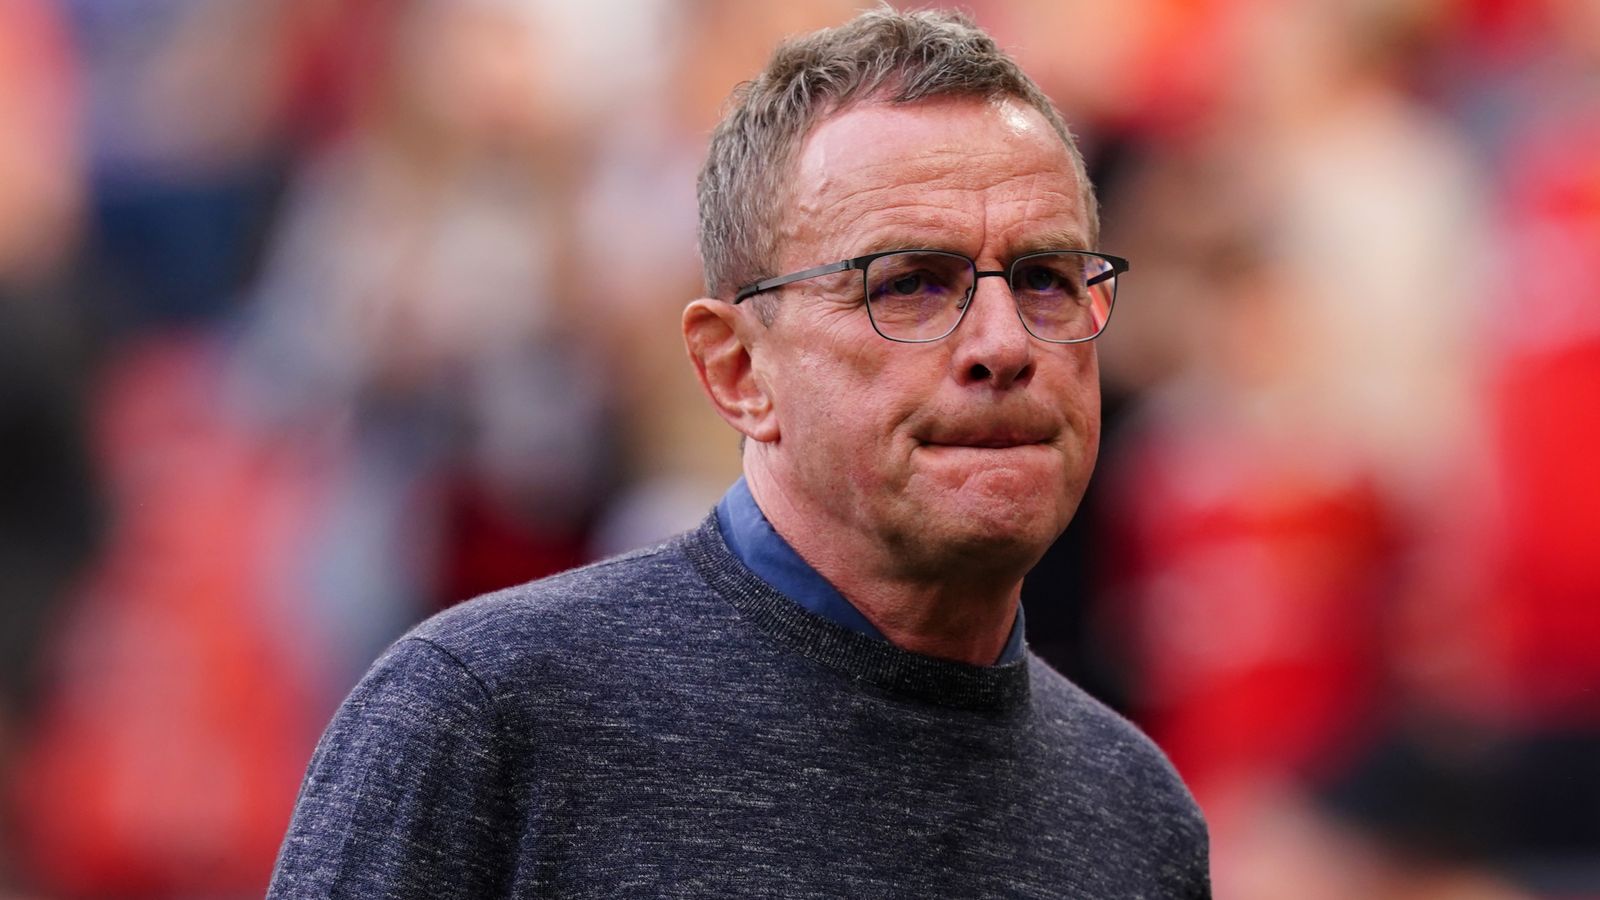 Ralf Rangnick will not take up consultancy role at Manchester United